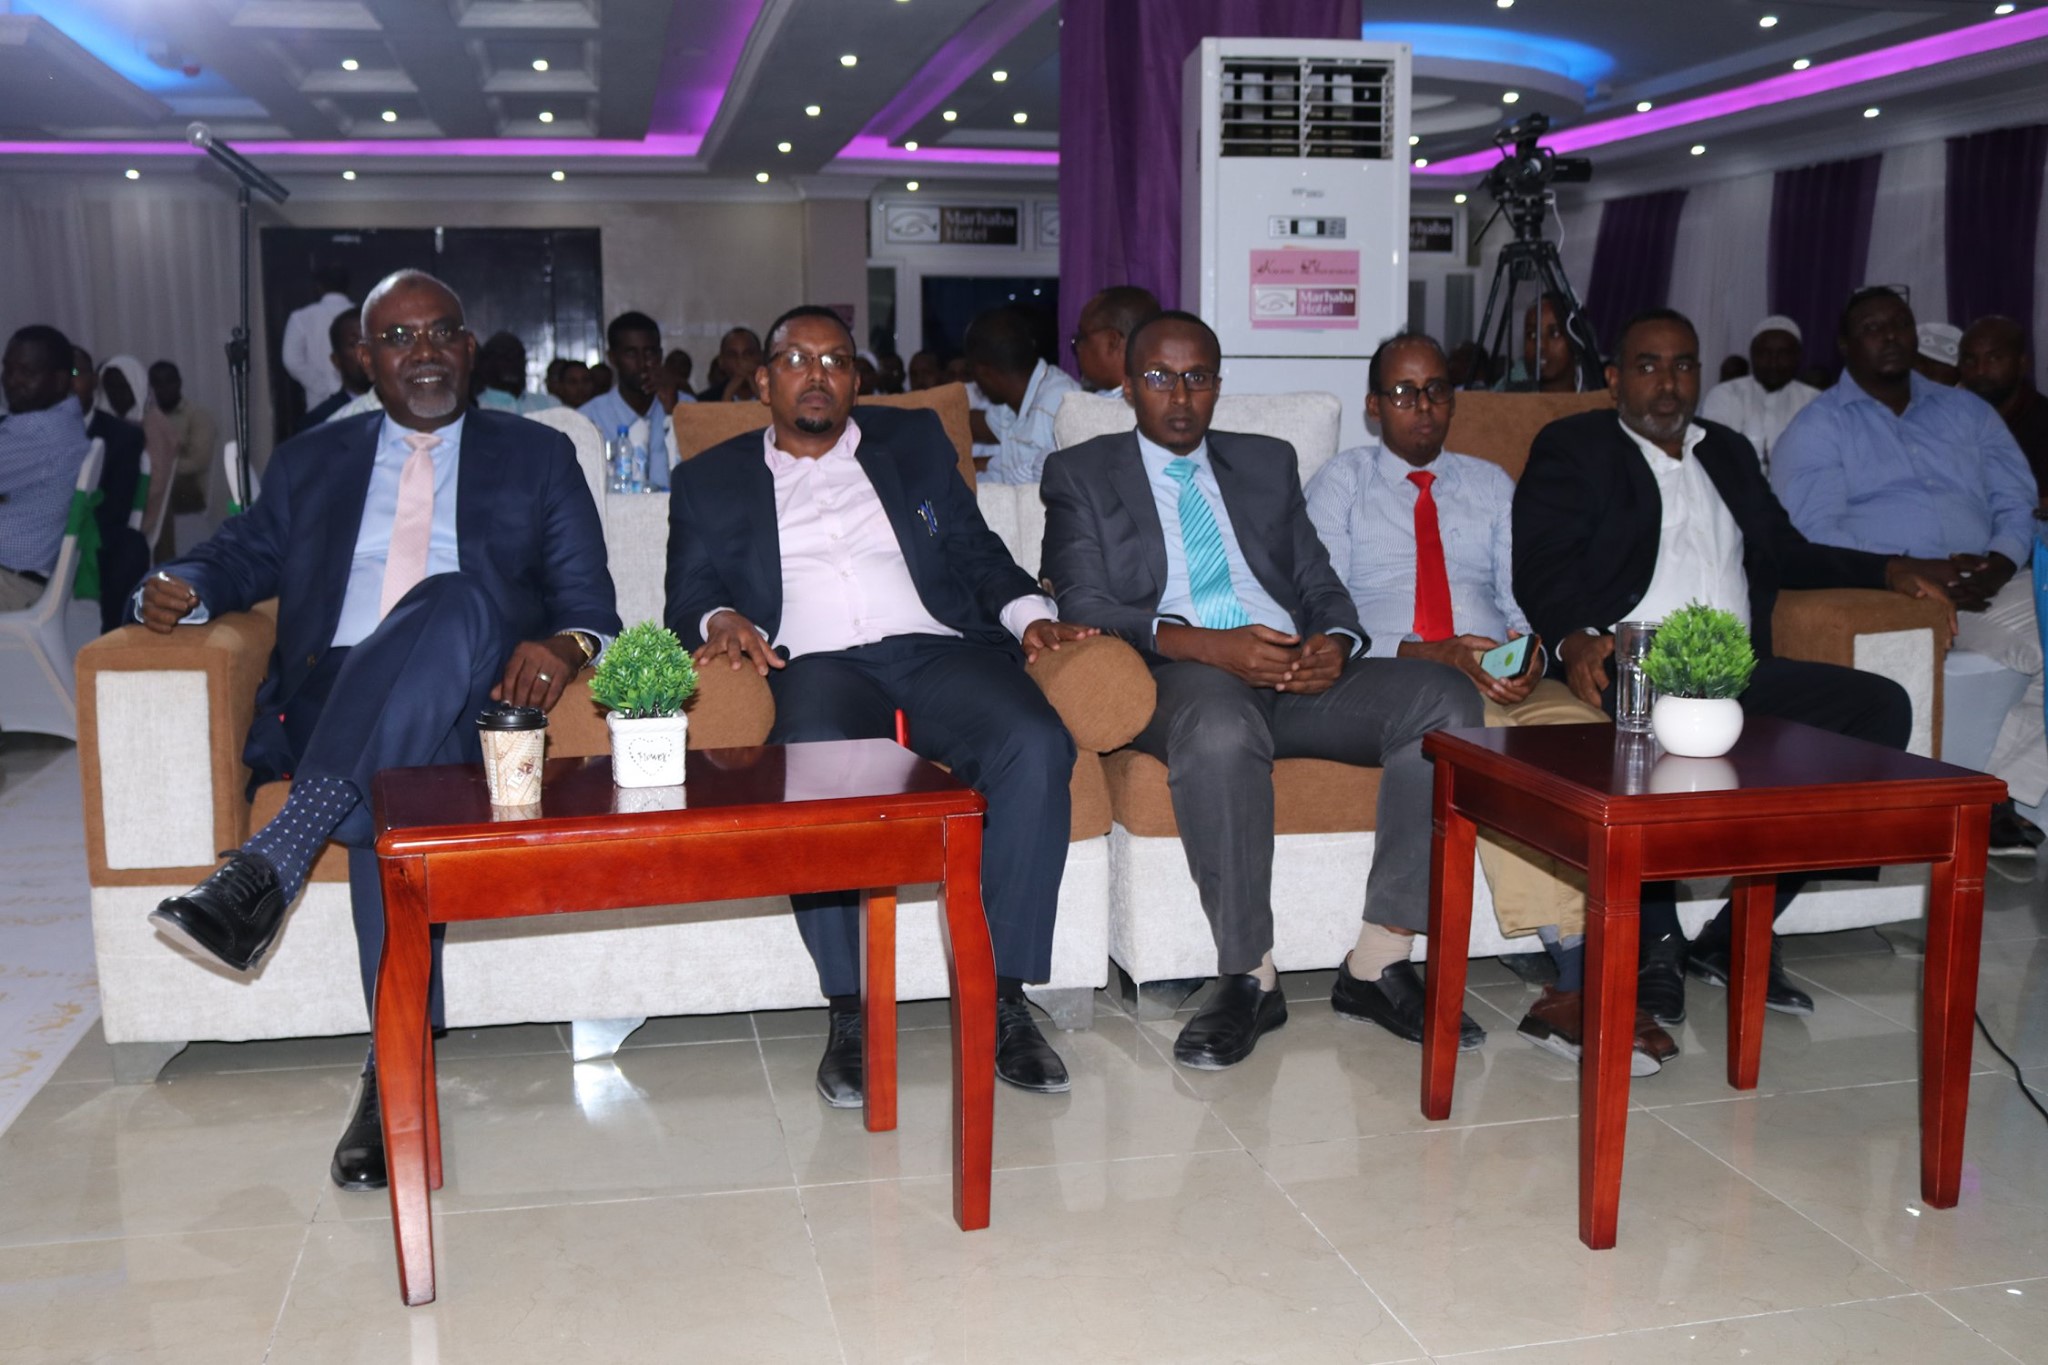 Dahabshil Bank International invited its customers to an Annual Customer Forum Event in Mogadishu.